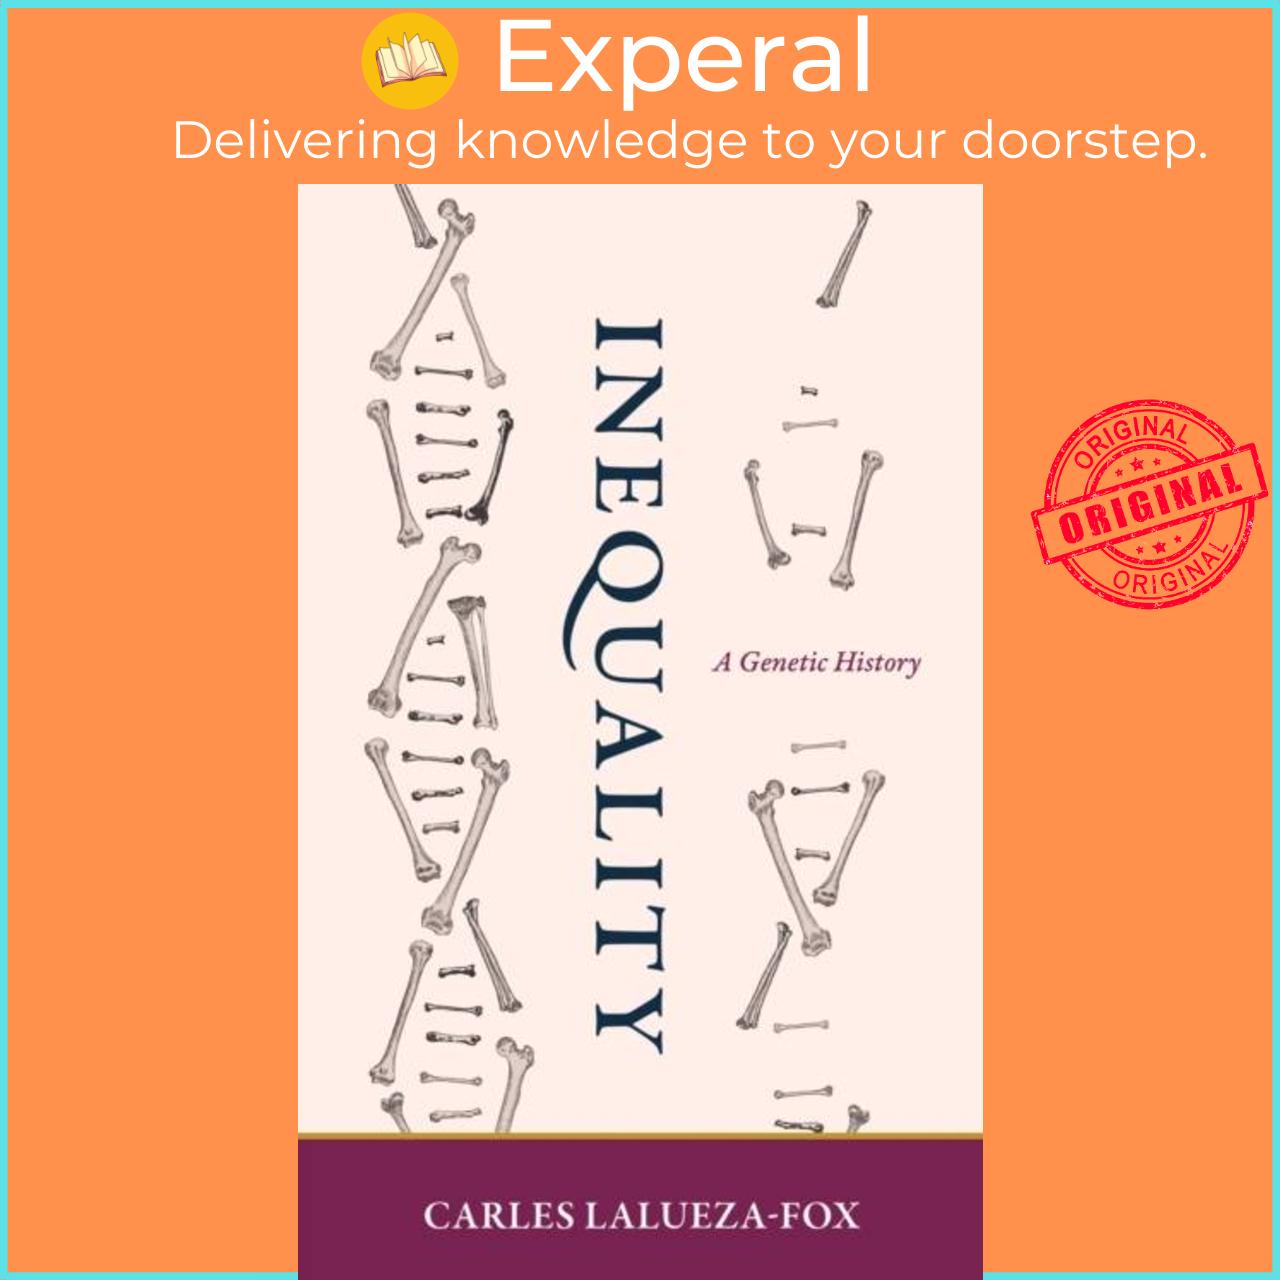 Sách - Inequality - A Genetic History by Carles Lalueza-Fox (UK edition, paperback)